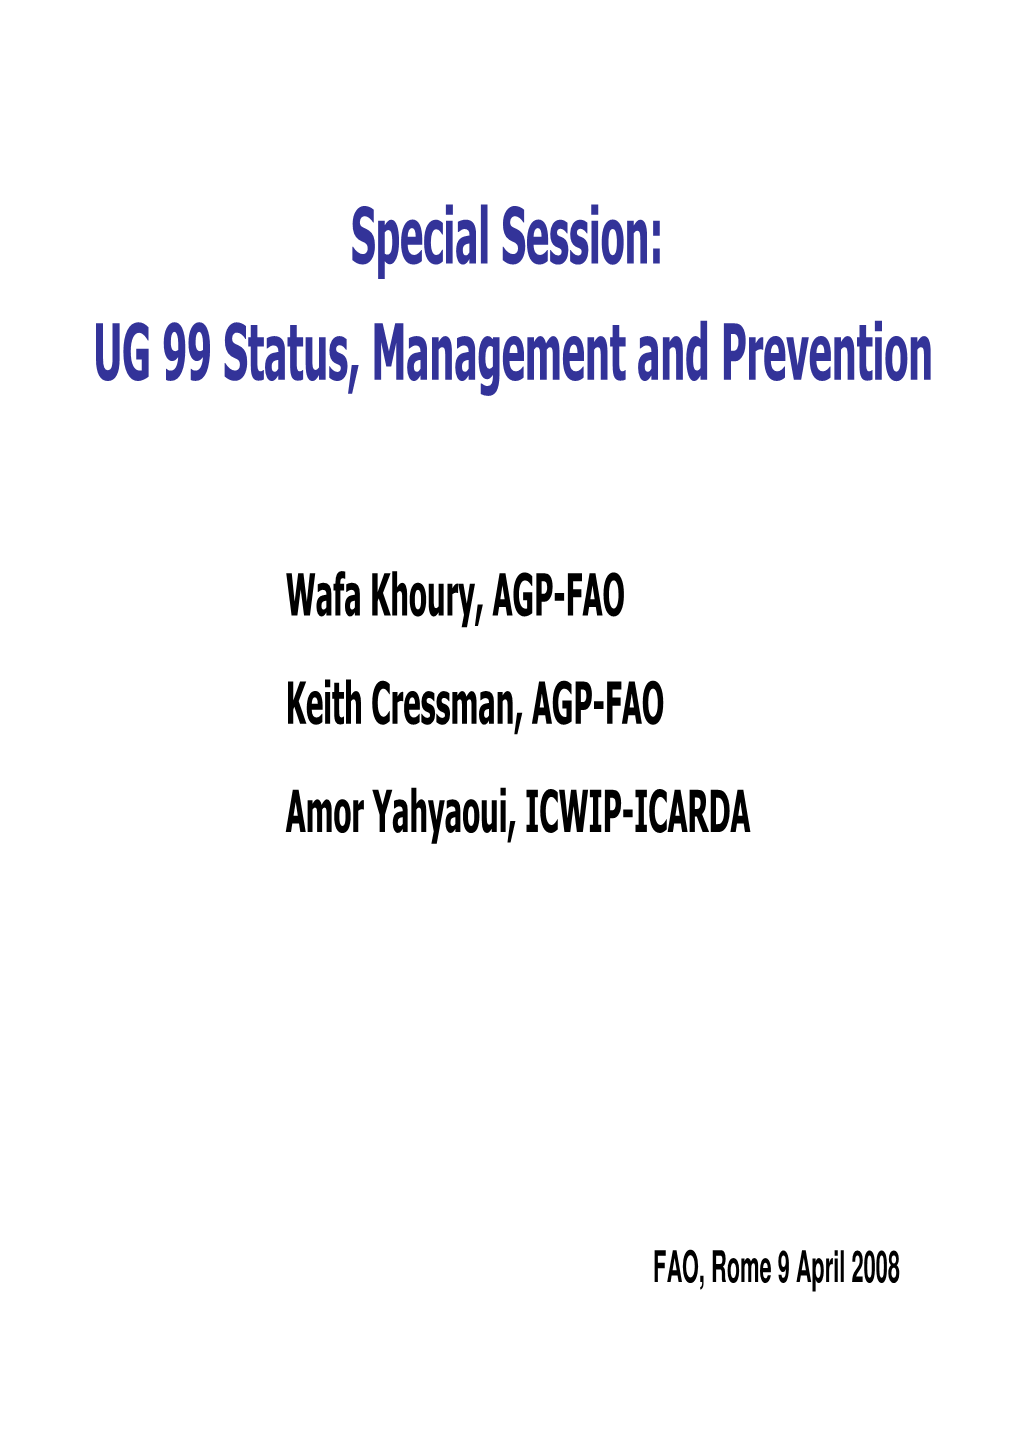 Special Session: UG 99 Status, Management and Prevention